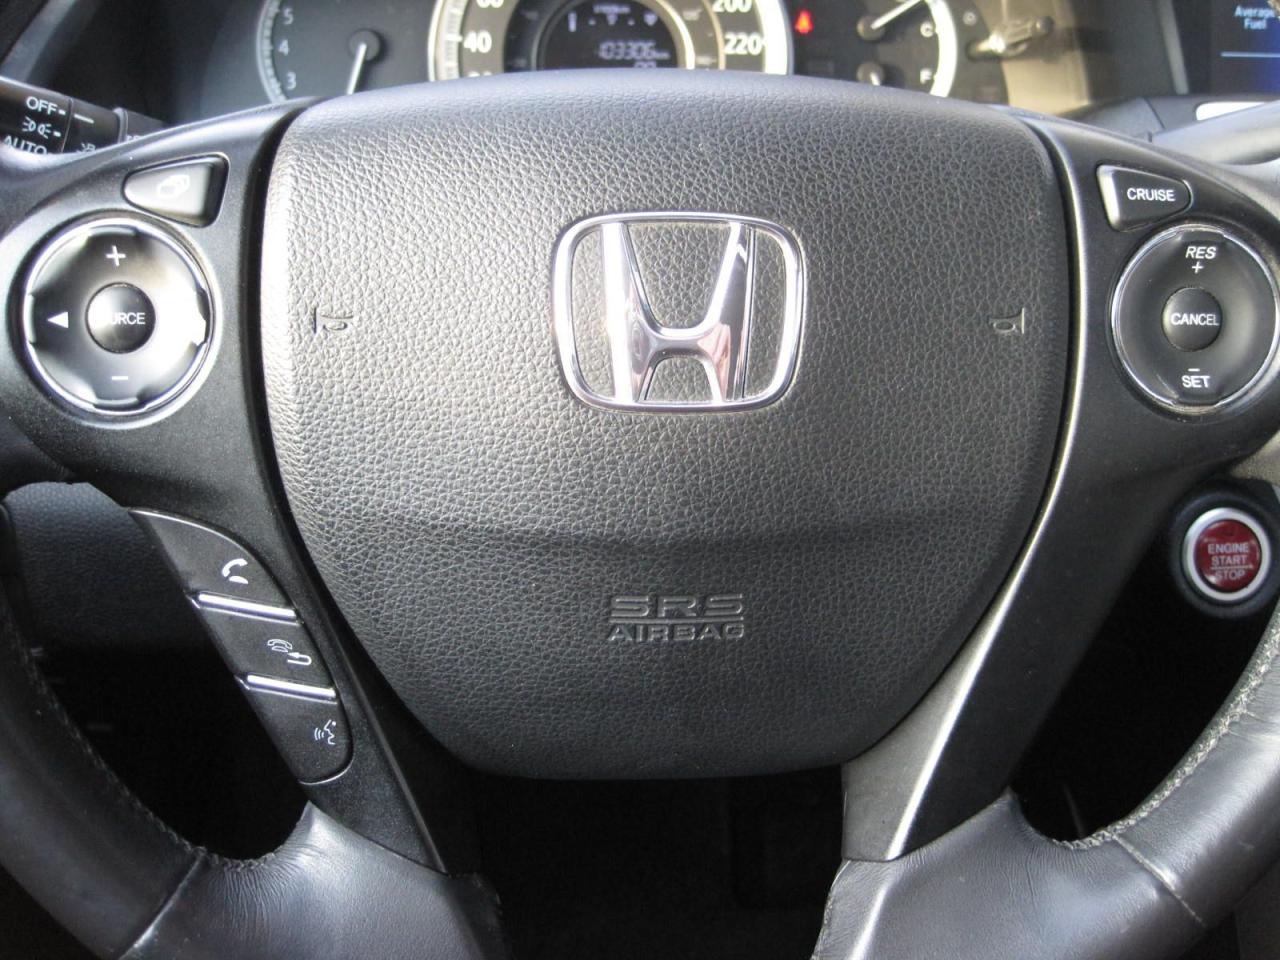 2013 Honda Accord "EX-L"-1 OWNER! ONLY 105K KMS! ONLY $10,490.00!!! - Photo #16